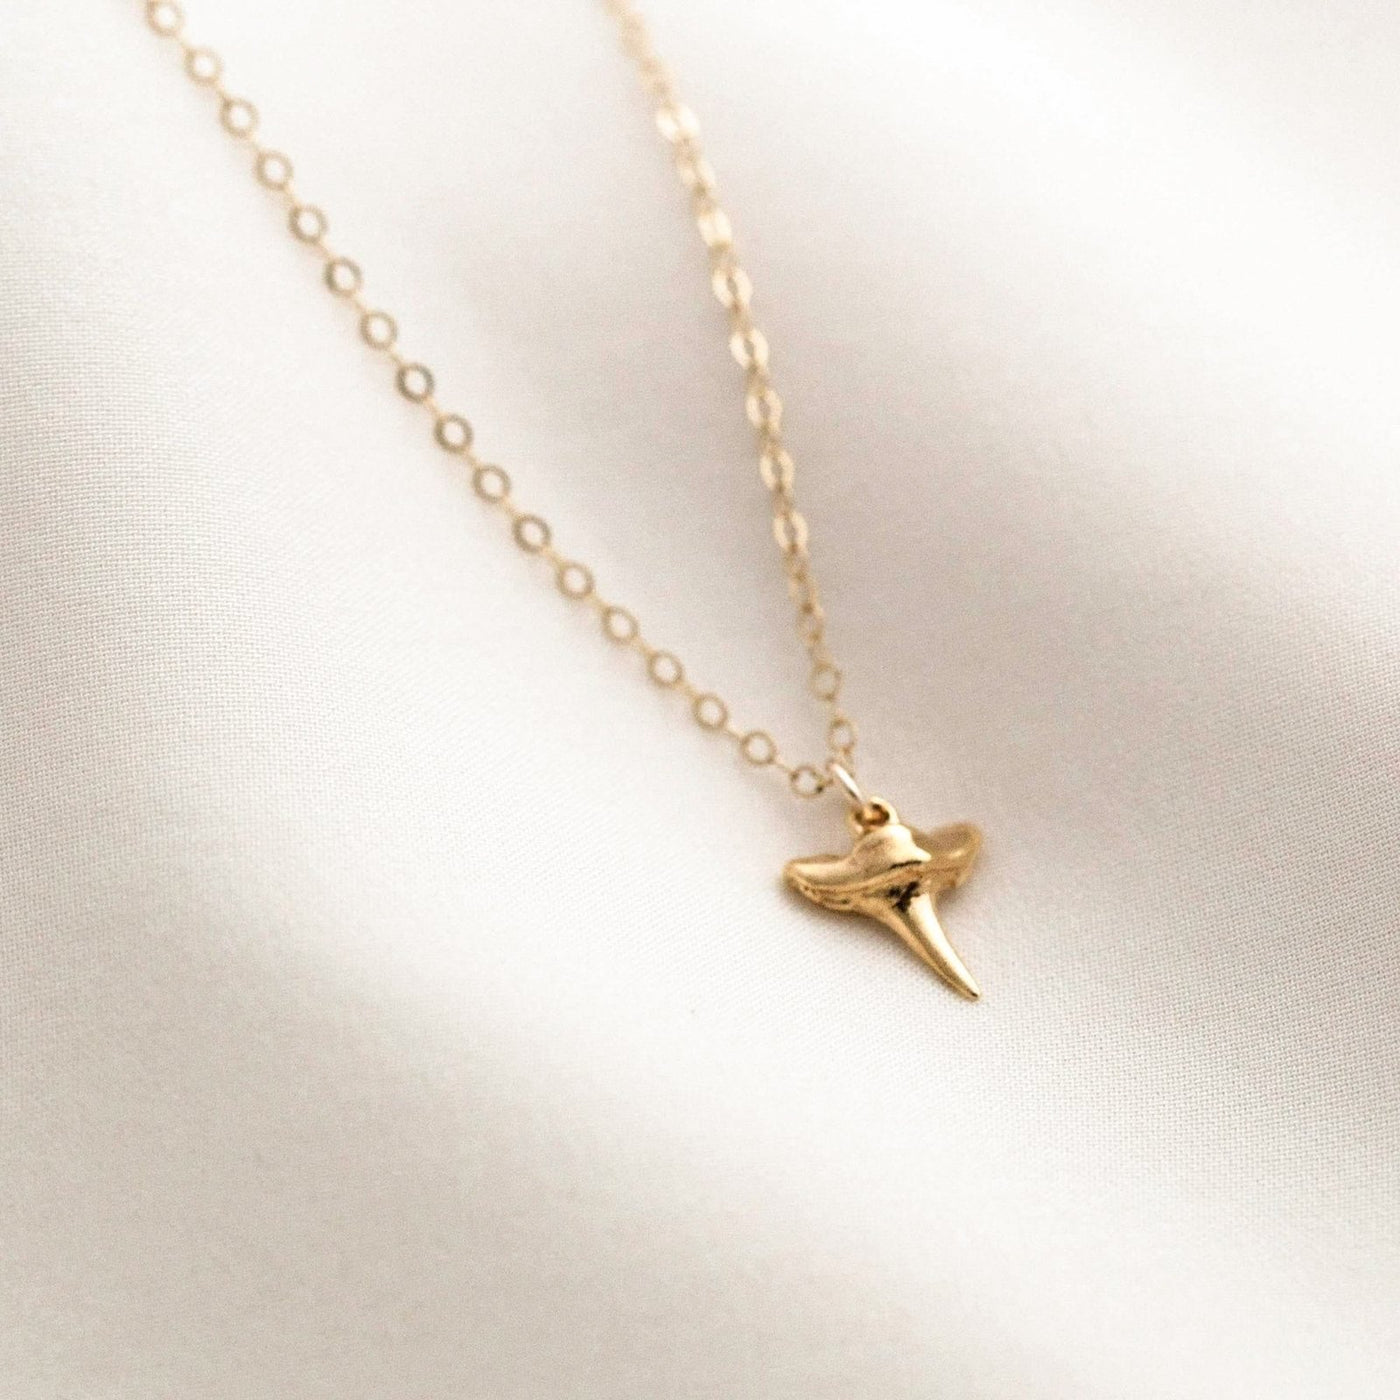 Tiny Shark Tooth Necklace by Simple & Dainty Jewelry